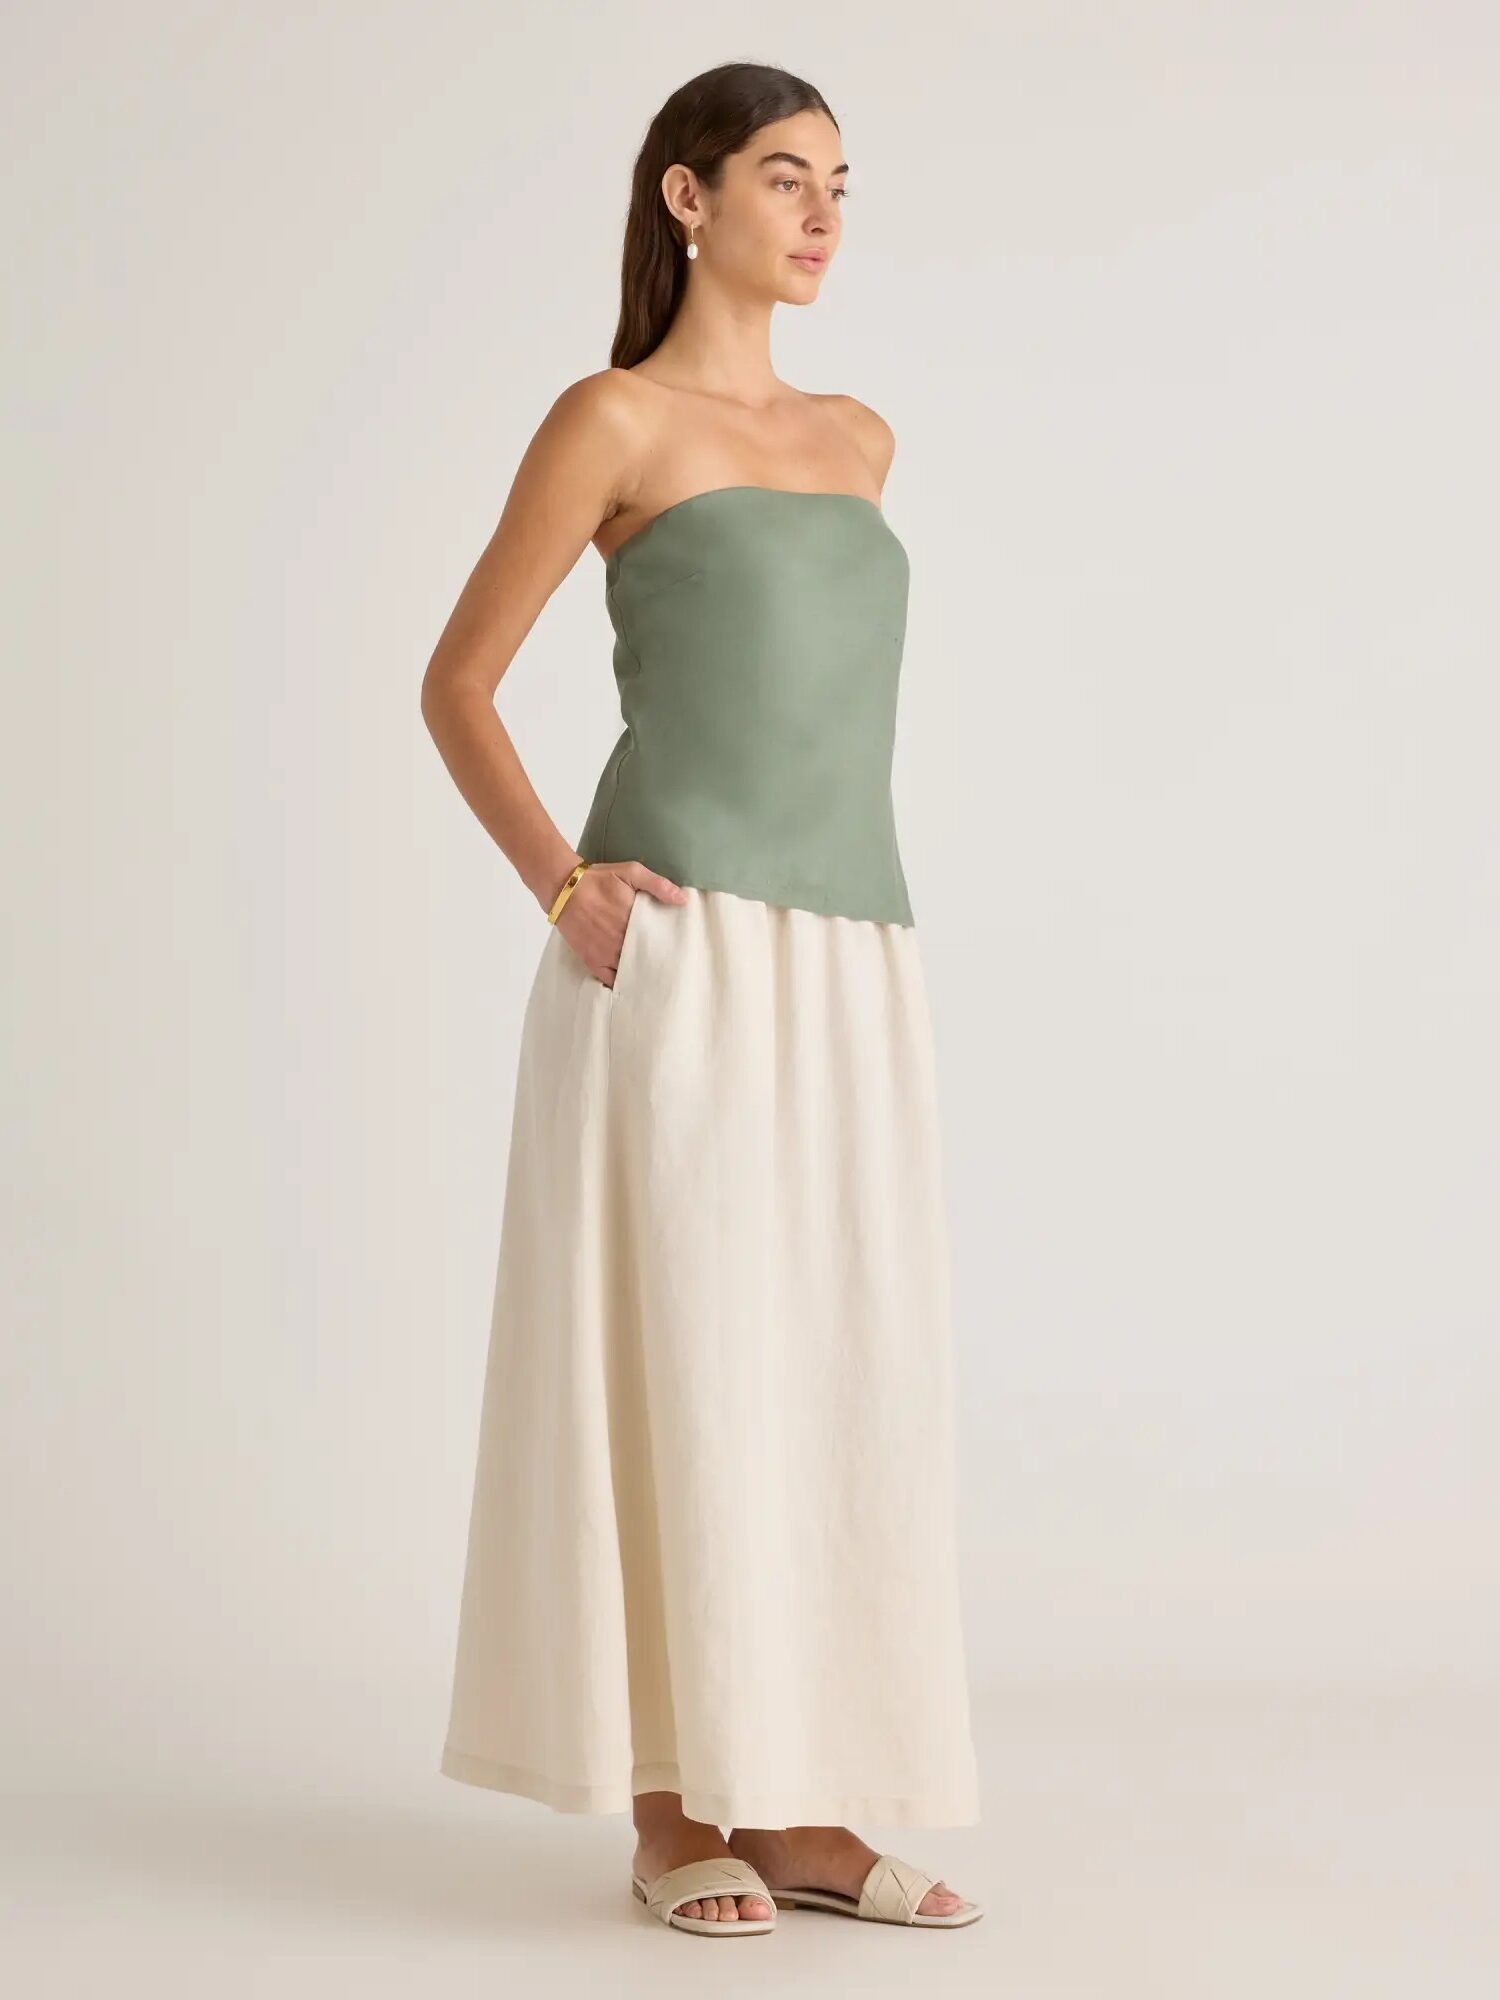 A woman stands in a studio, wearing a strapless green top and cream wide-leg trousers, looking to the side.